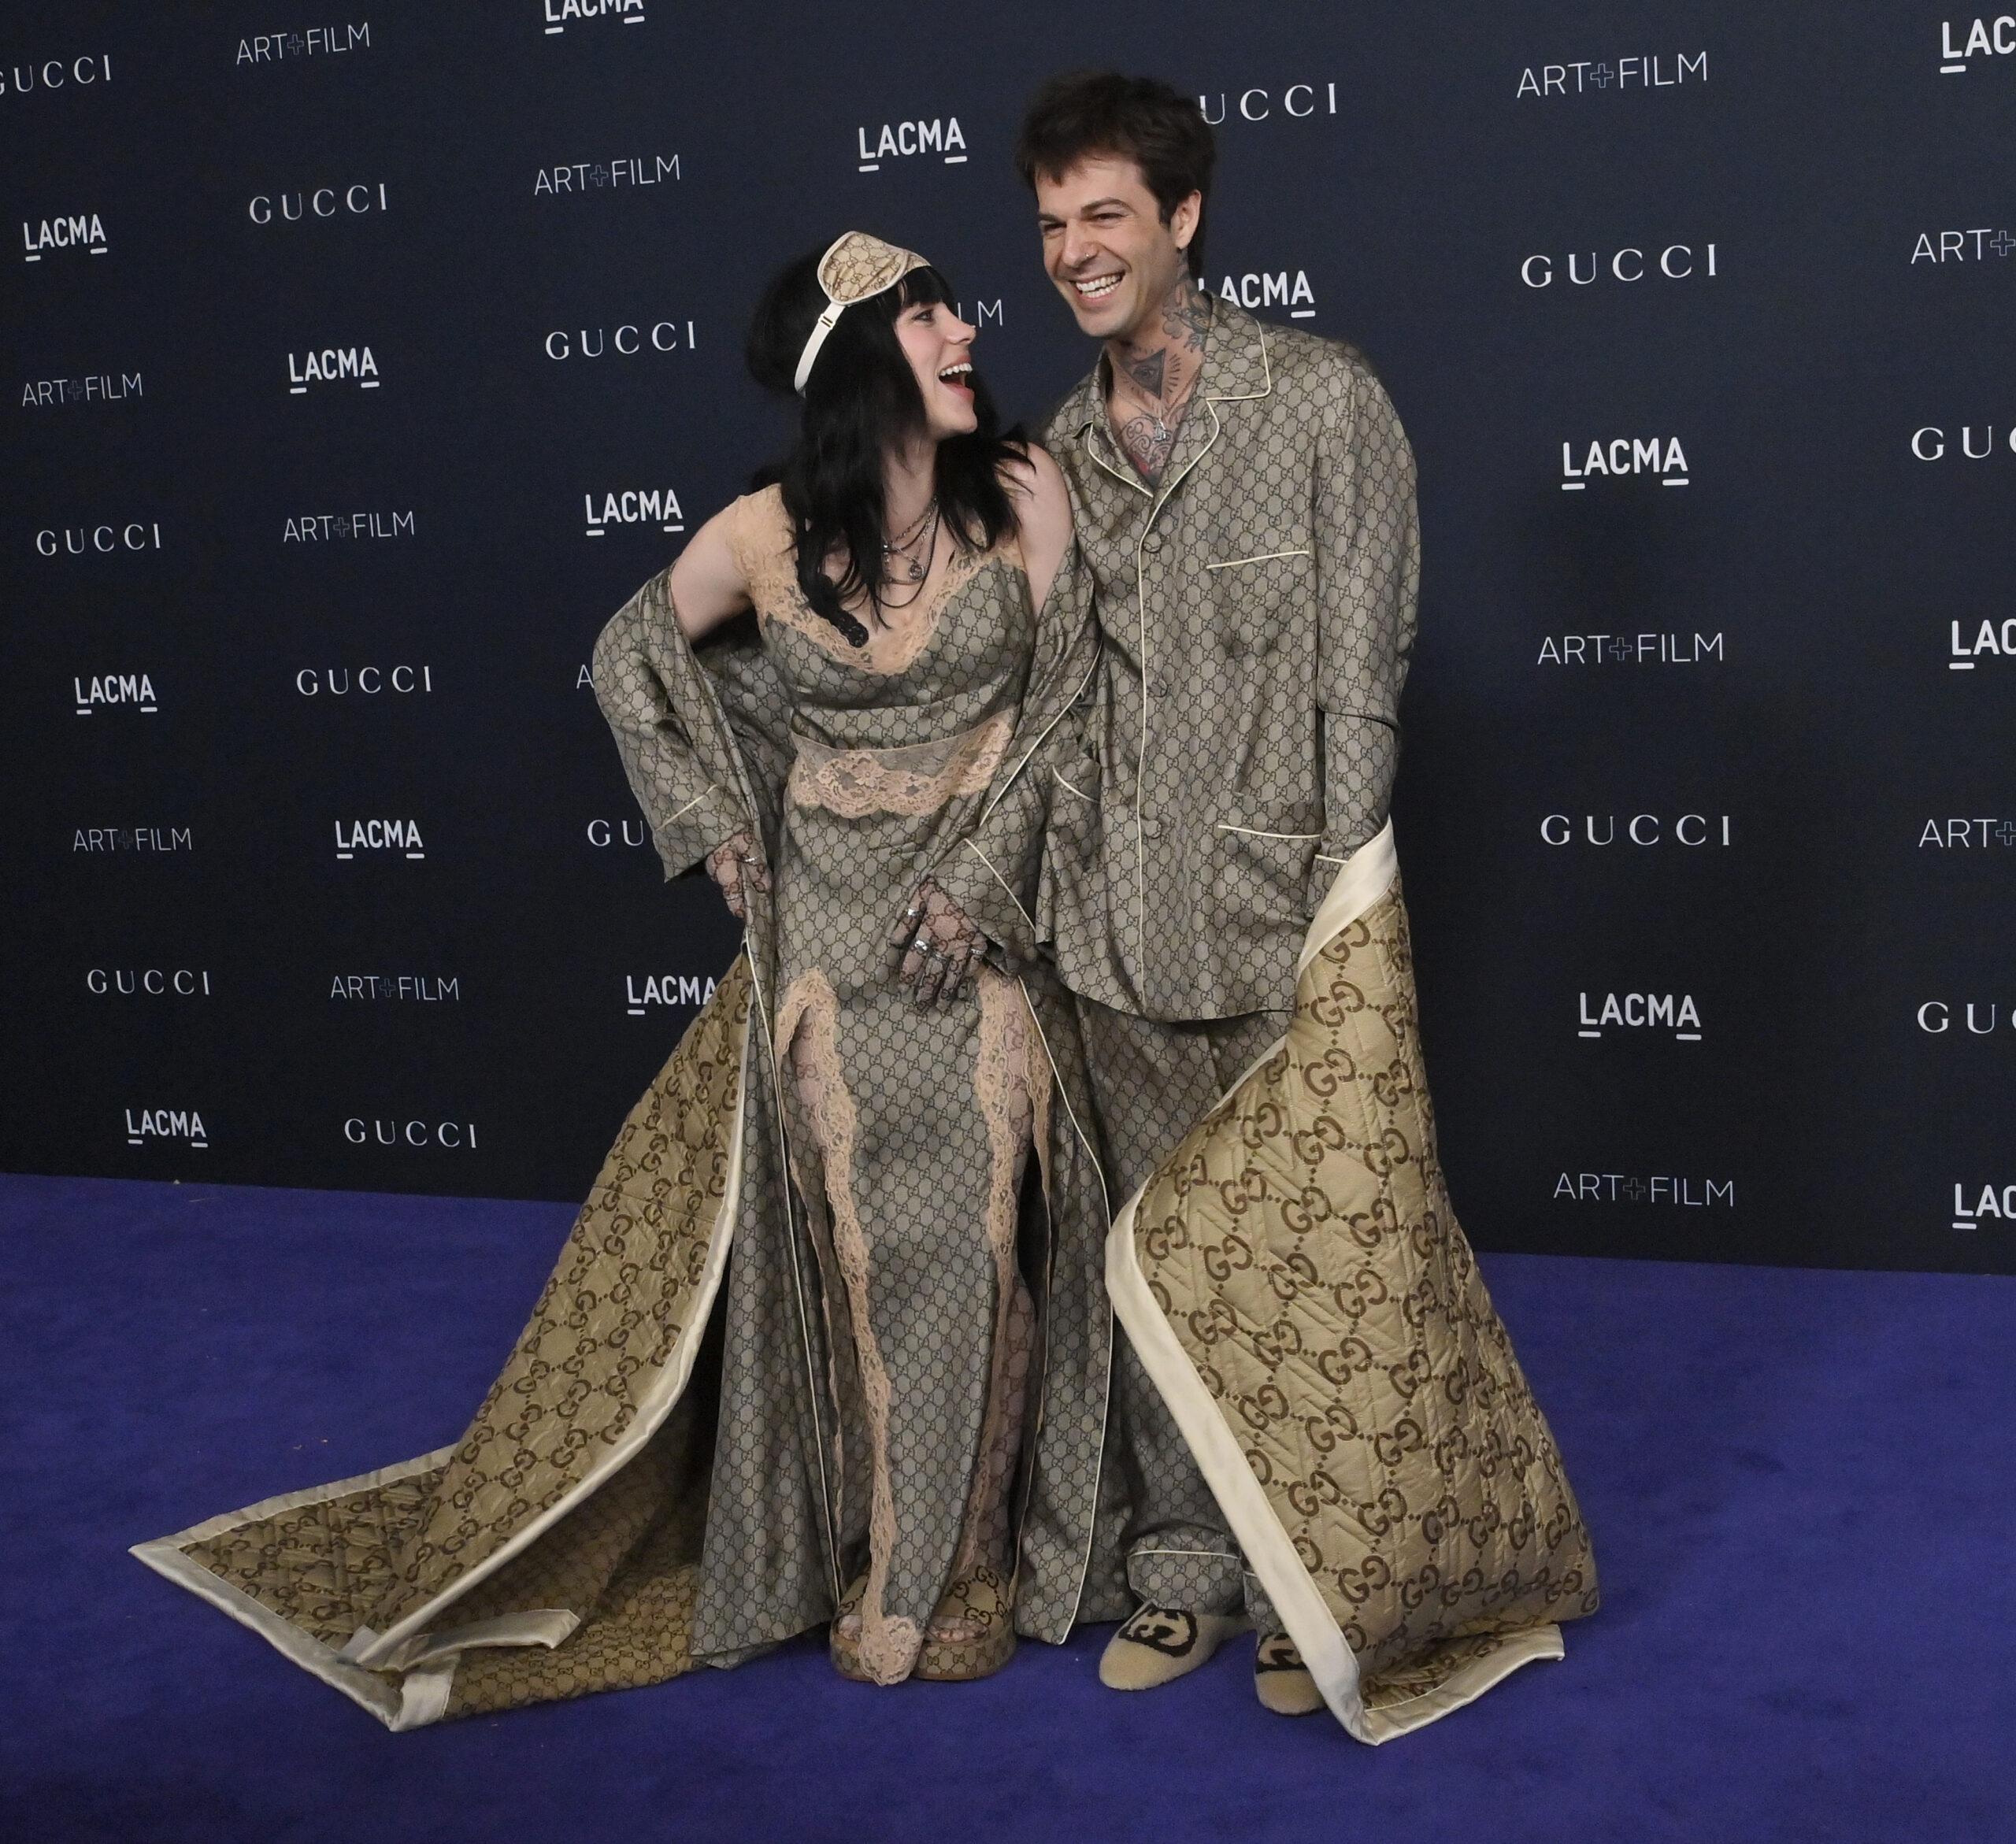 Billie Eilish and Jesse Rutherford Attend the LACMA Art+Film Gala in Los Angeles